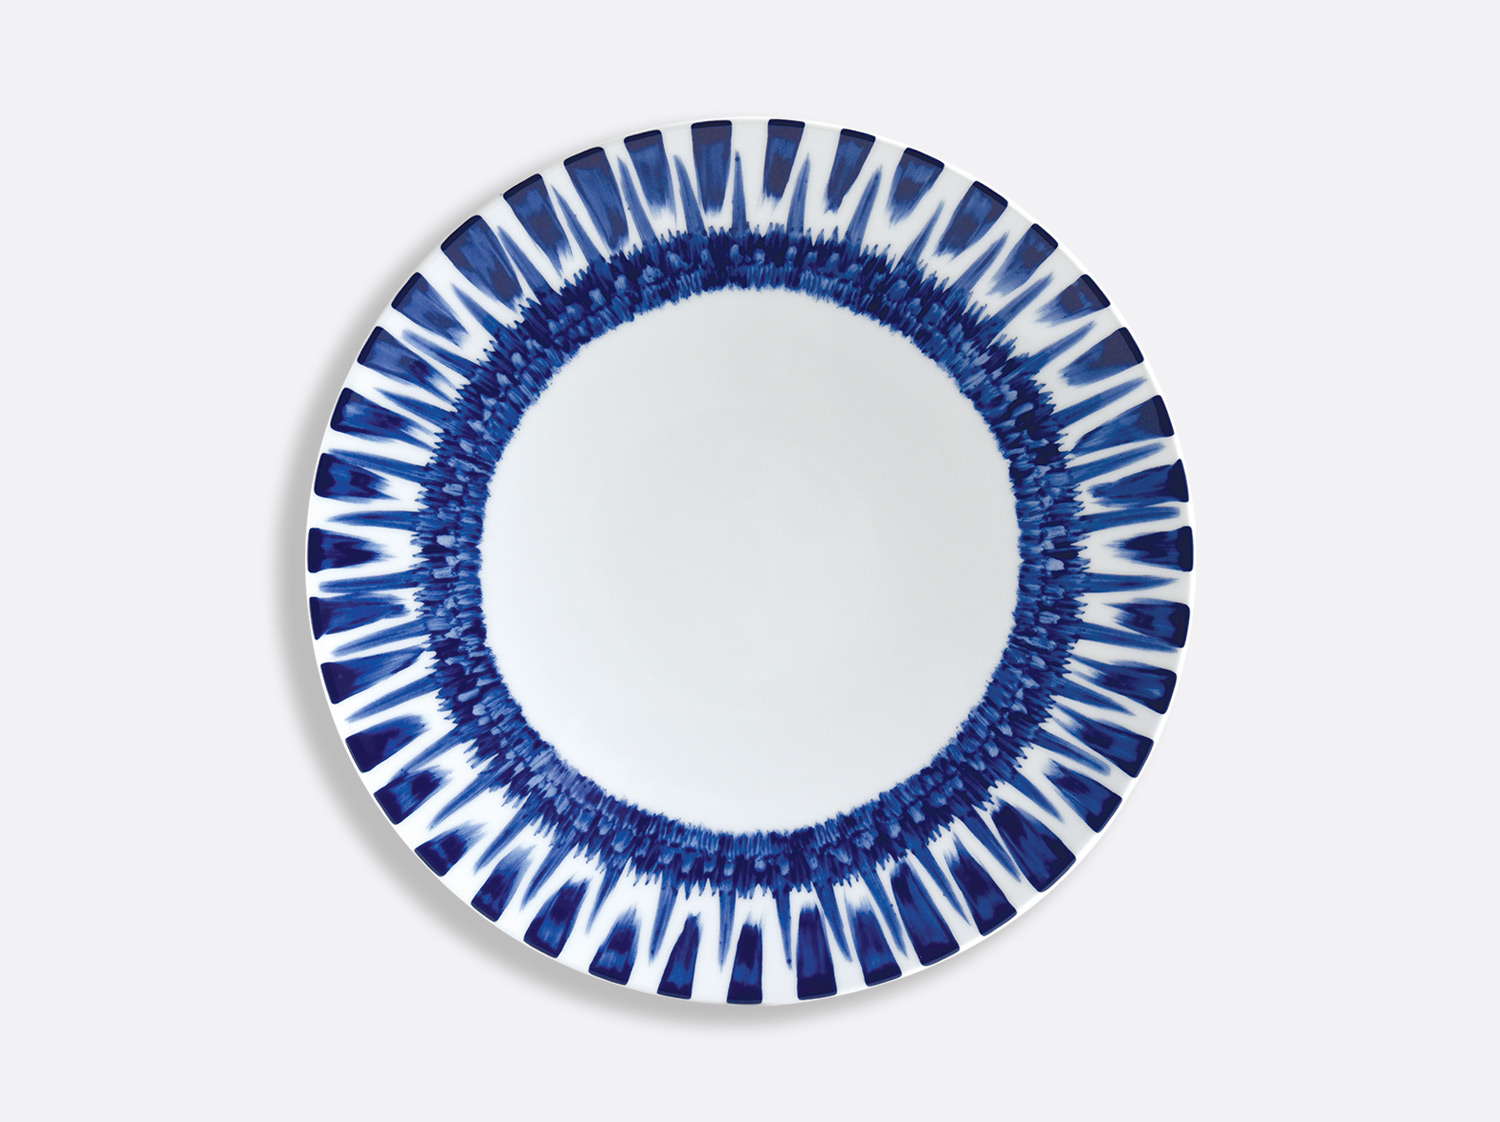 China Dinner plate 10.6'' of the collection IN BLOOM - Zemer Peled | Bernardaud